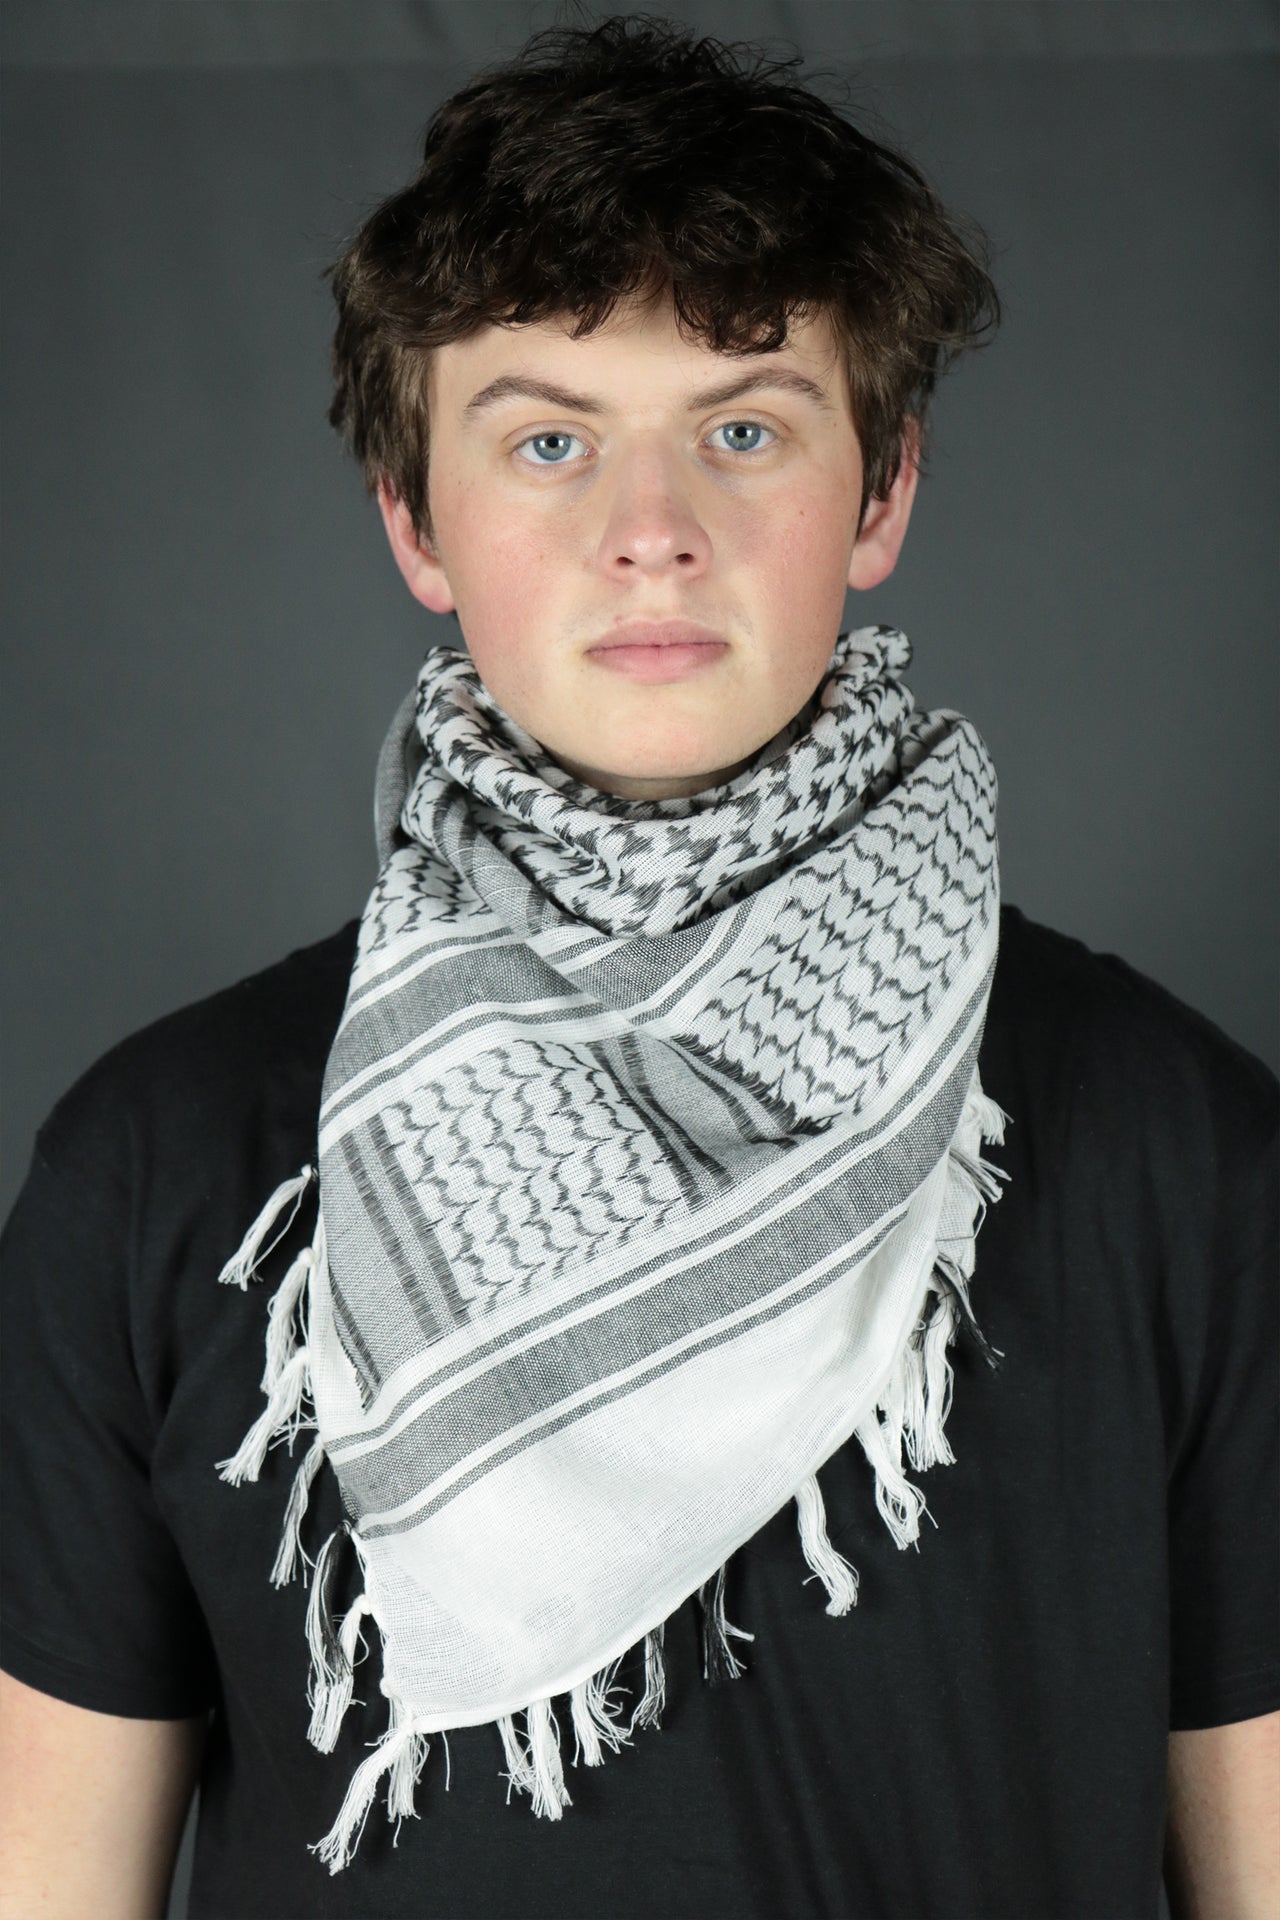 Arabic Sheik Print Shemagh Scarf | Black and White Face Scarf